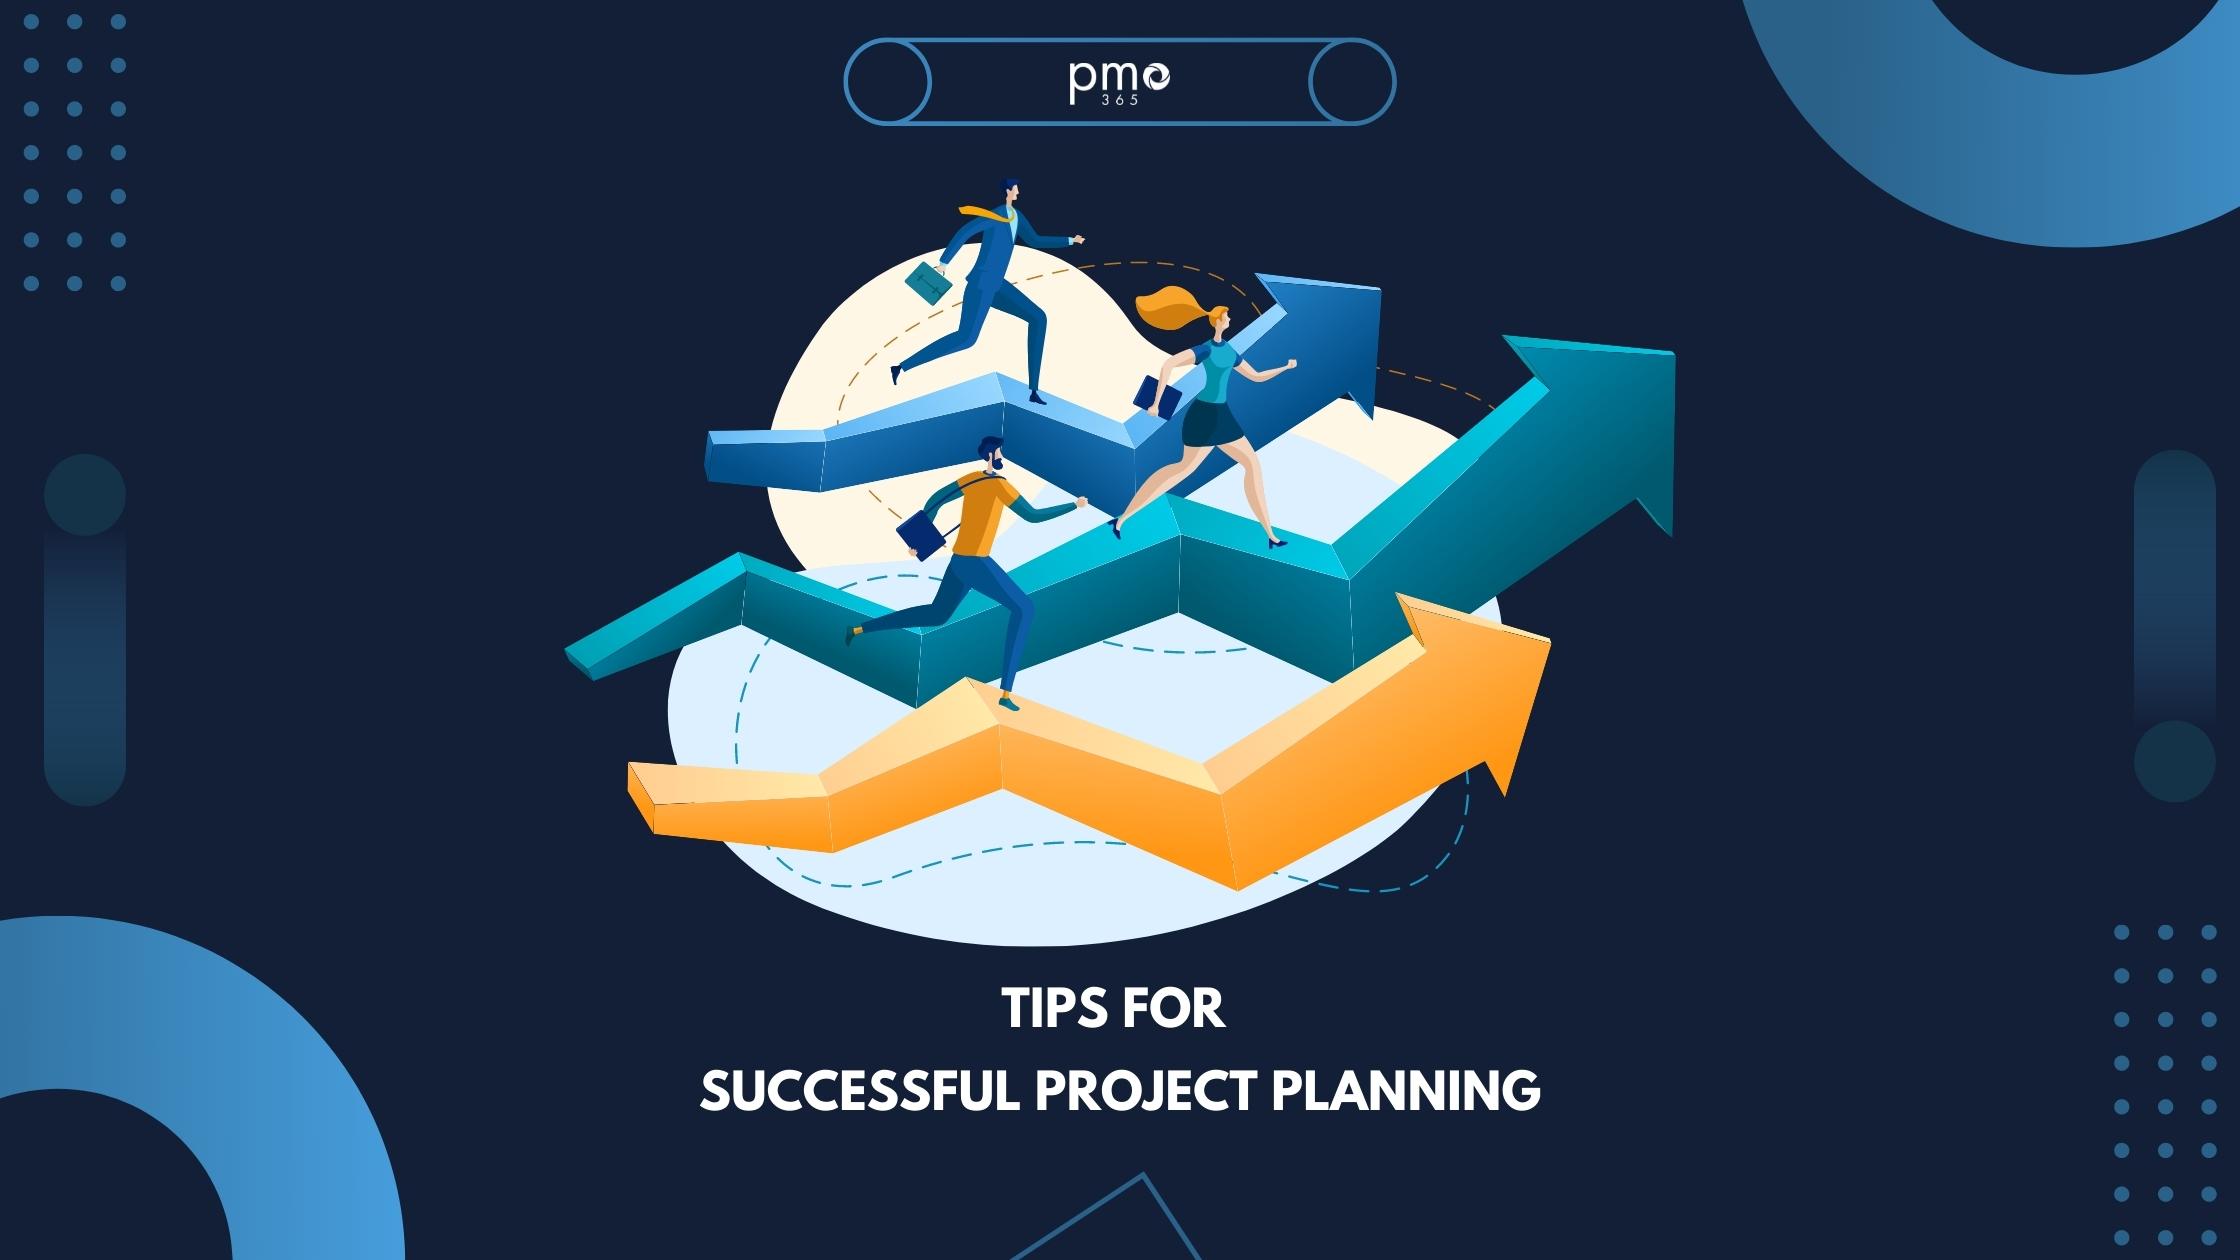 Project Planning Templates: 7 Tips for Success